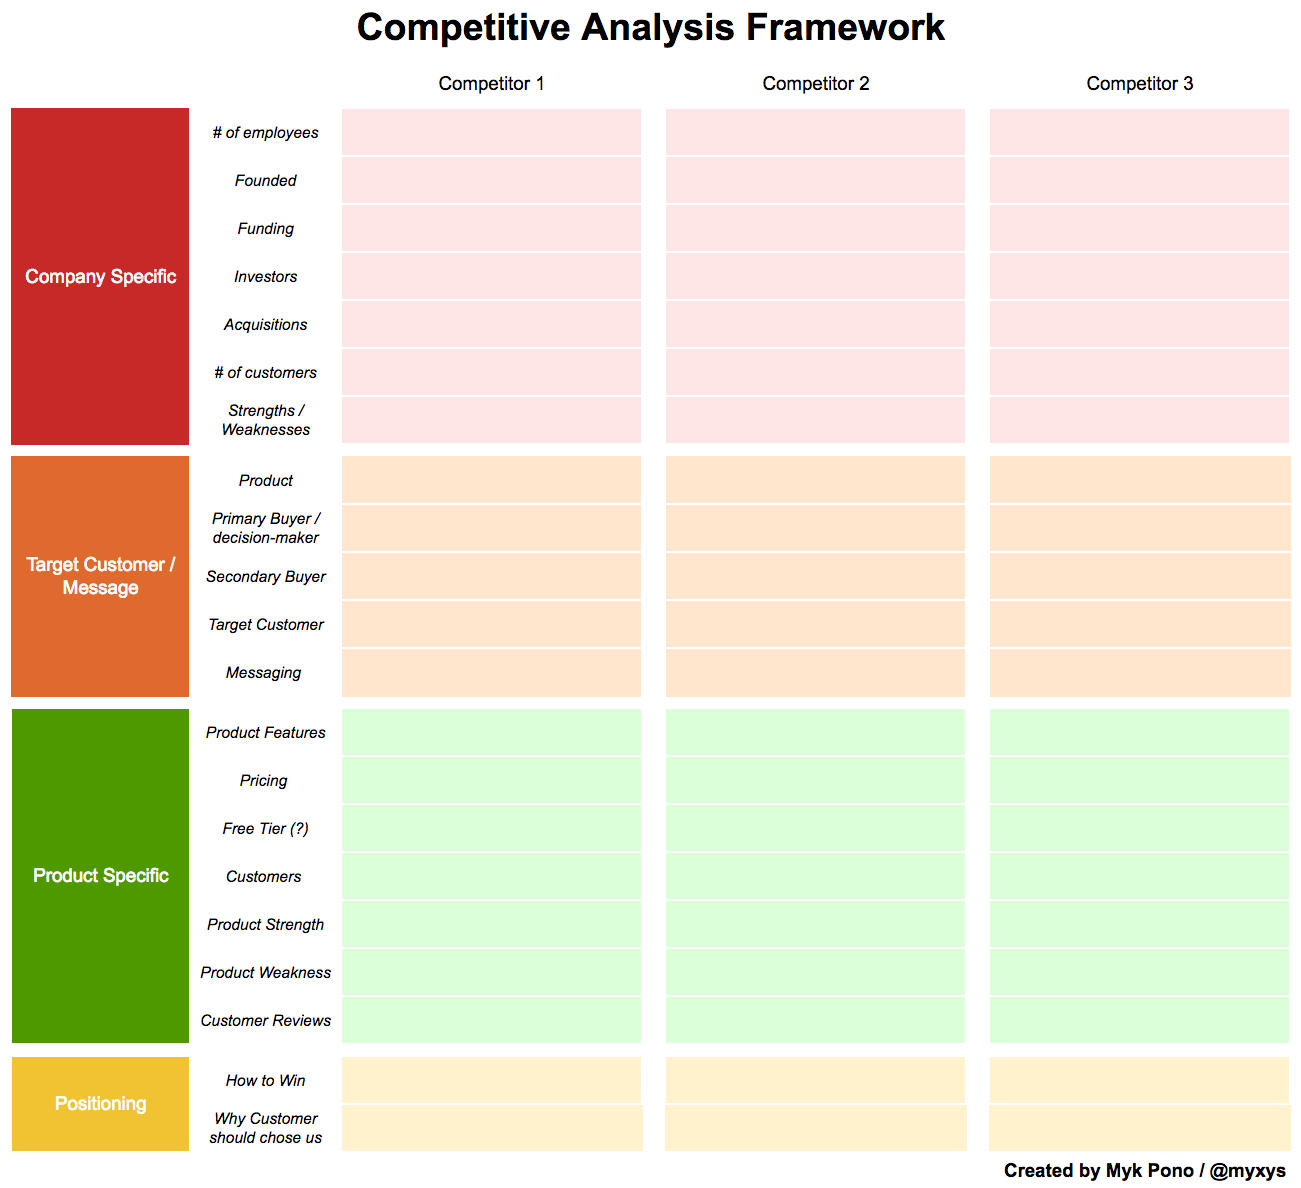 How to run a competitive market analysis